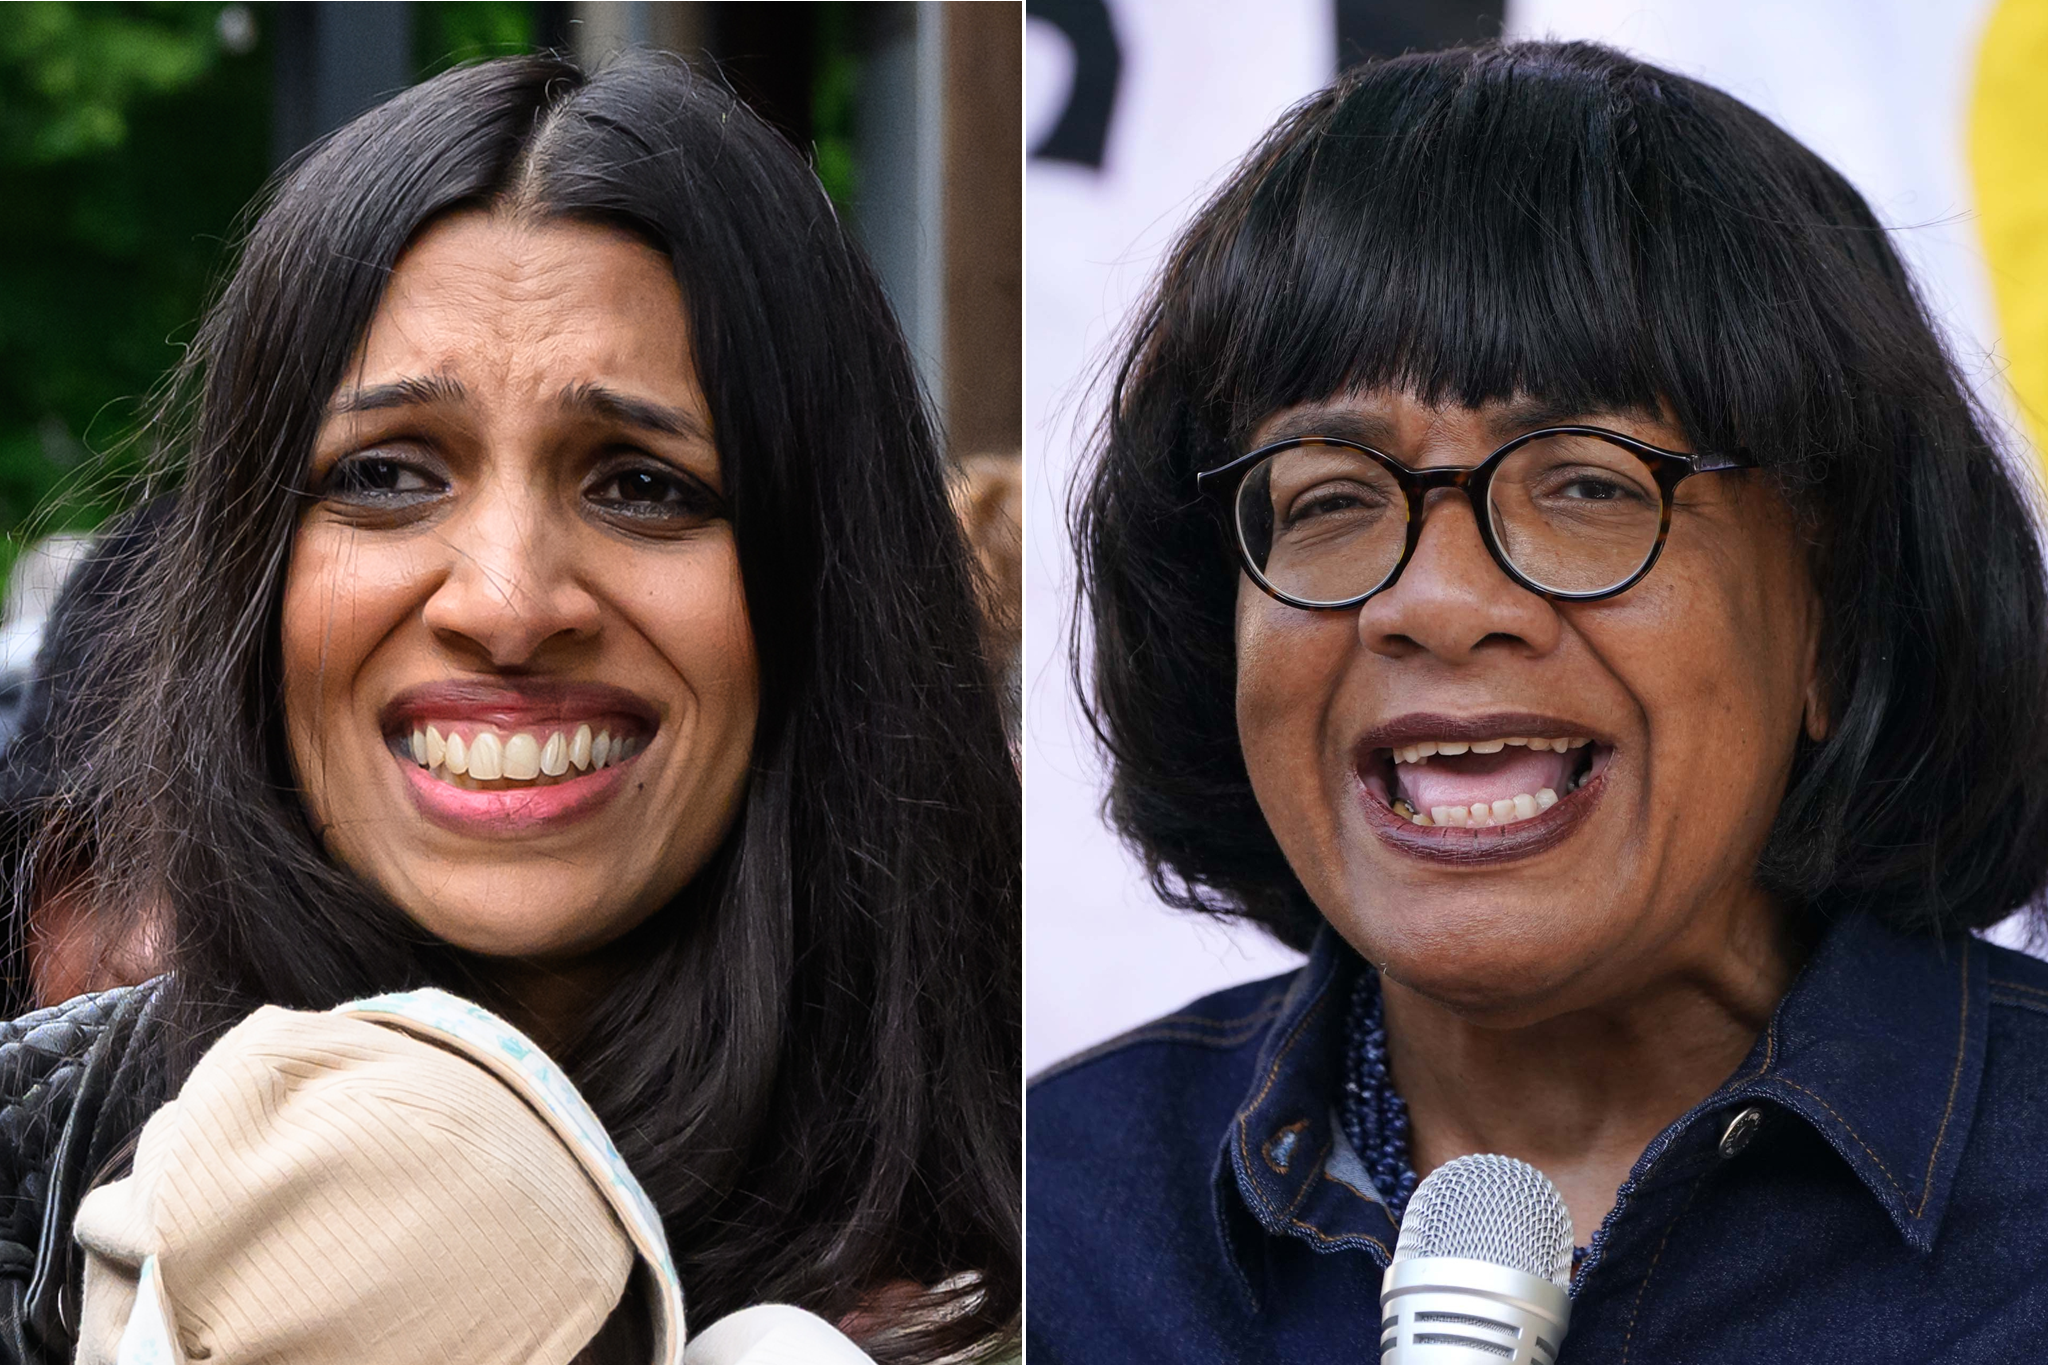 Labour has seen rows over the candidacies of Faiza Shaheen (left) and Diane Abbott during the election campaign